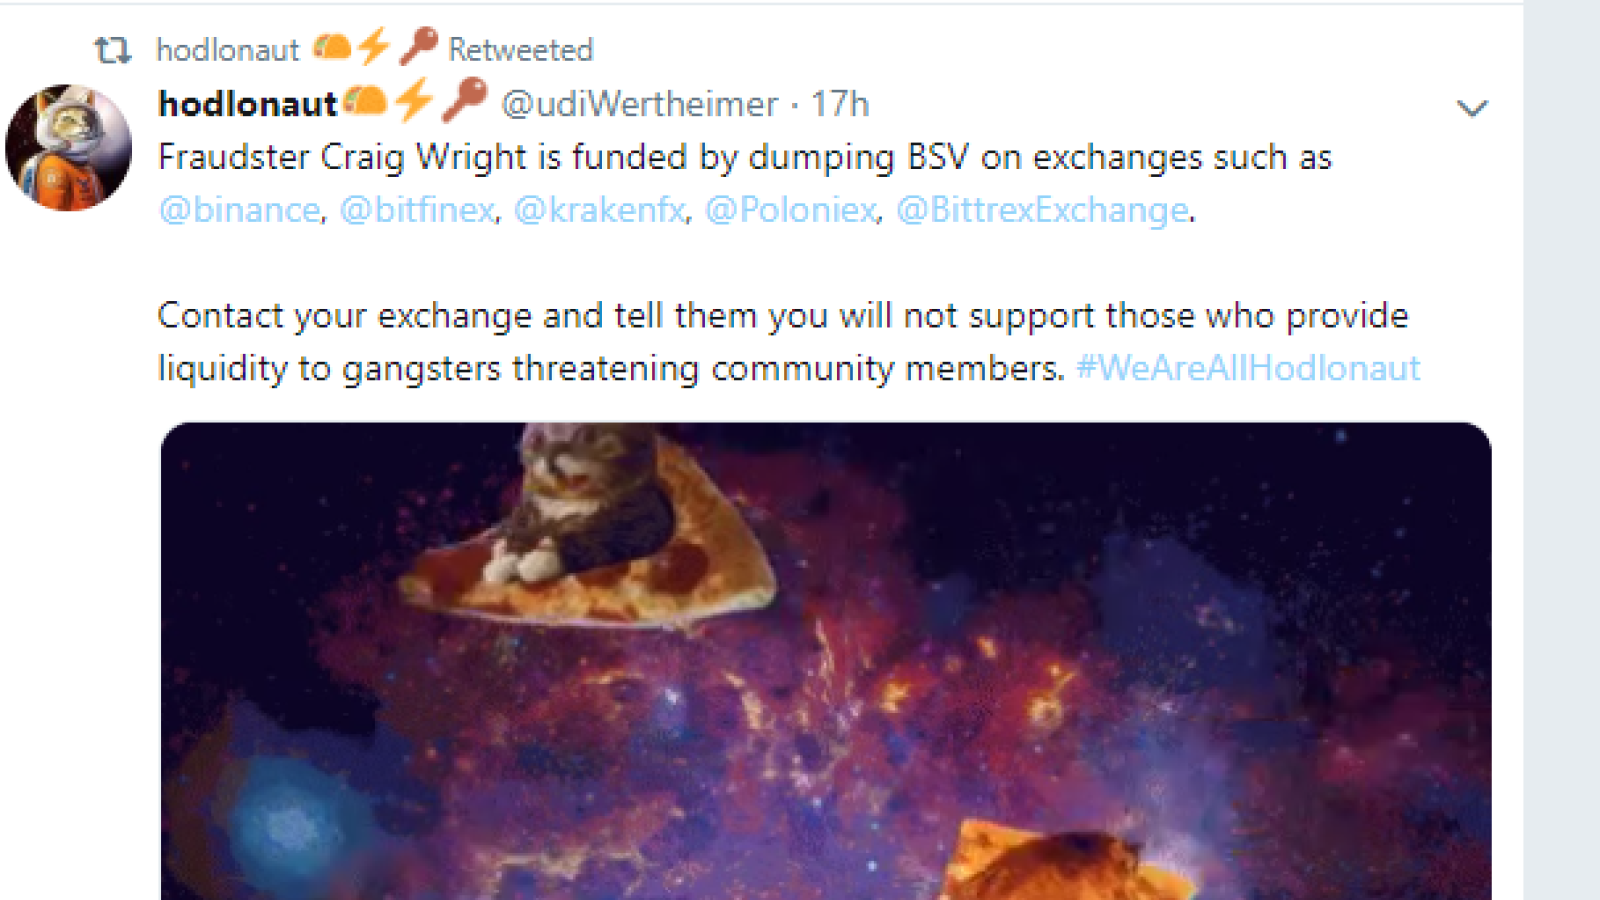 Binance's CZ Threatens to Delist BSV, Responding to Craig Wright's Letter to Sue Hodlonaut for Libel